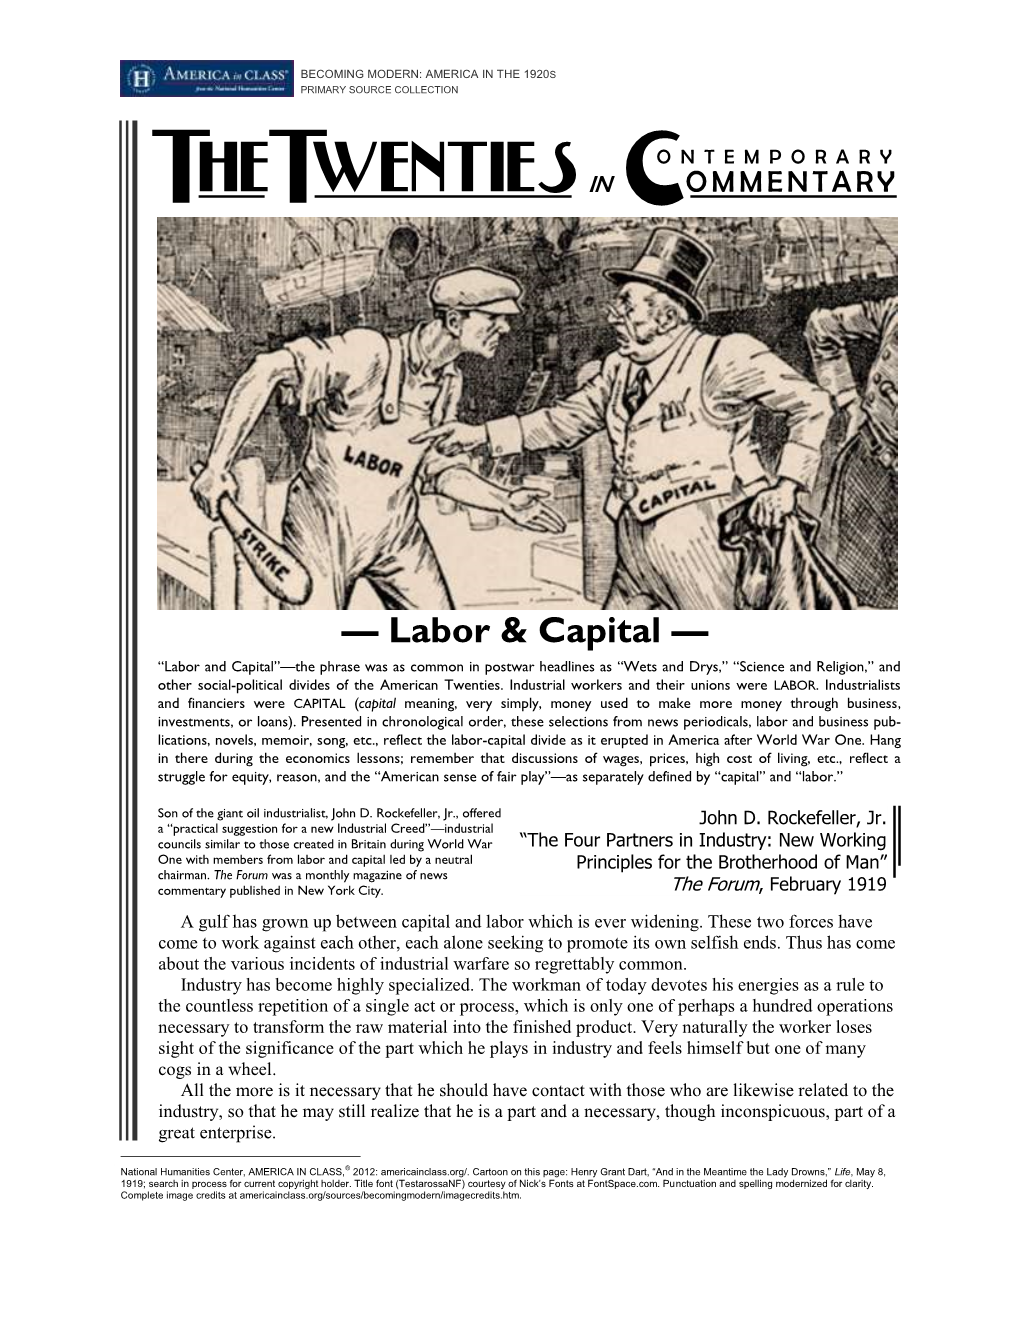 Labor and Capital in the 1920S: Collected Commentary